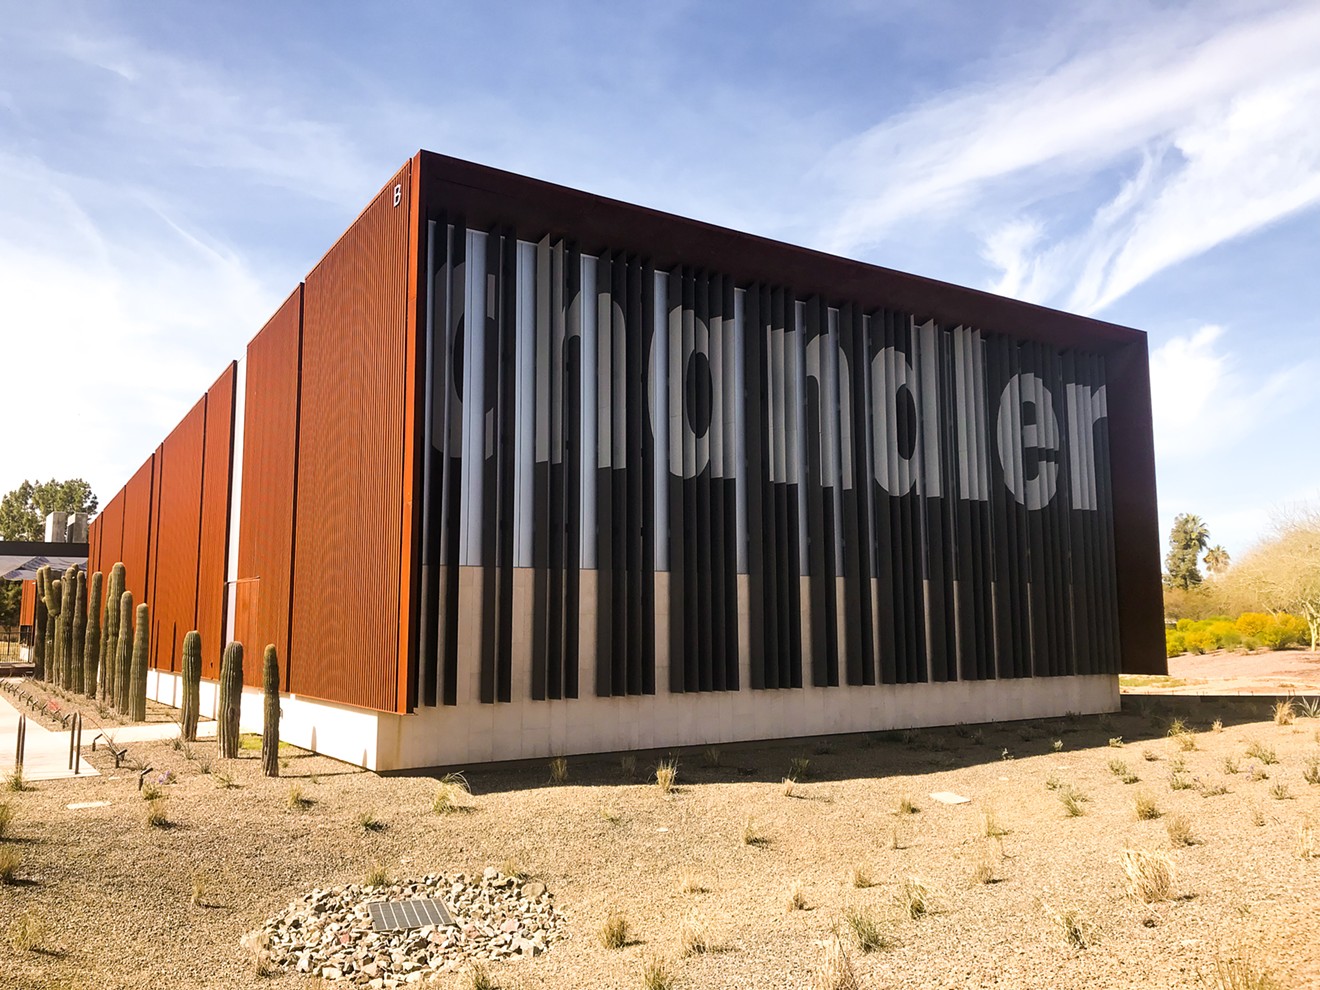 The new Chandler Museum is located just north of the Chandler Fashion Center Mall.